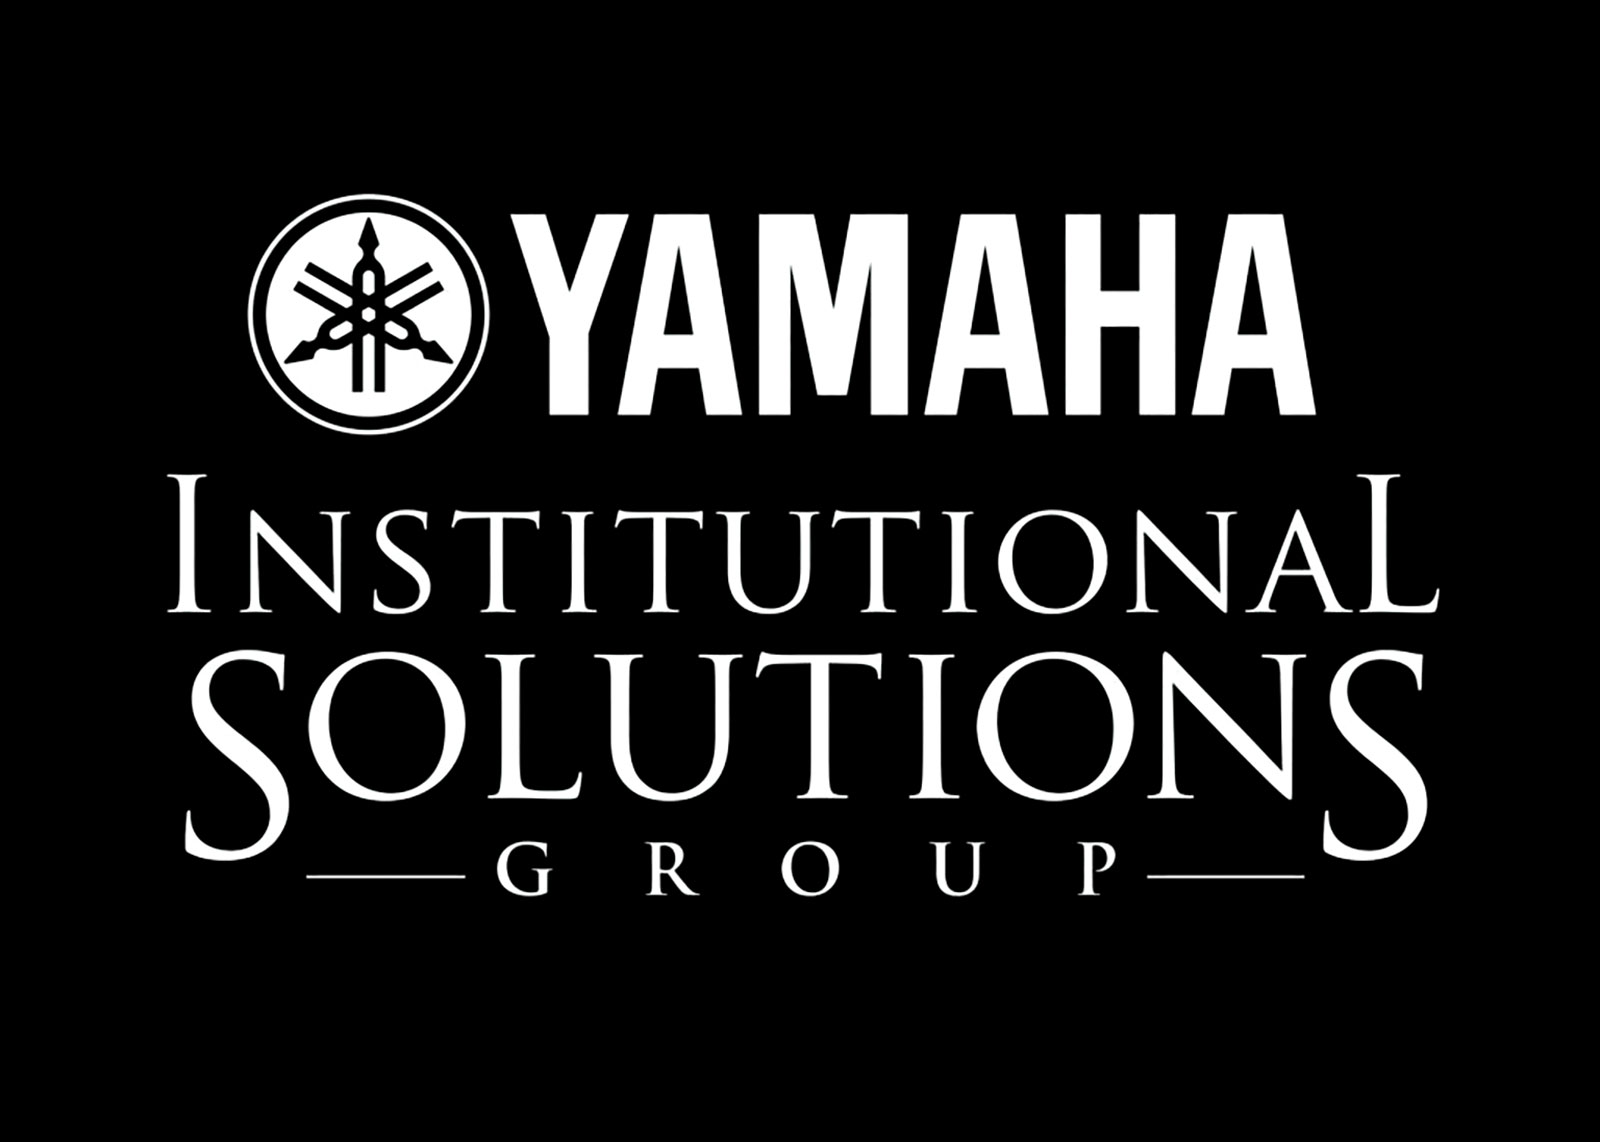 Yamaha Institutional Solutions Group member